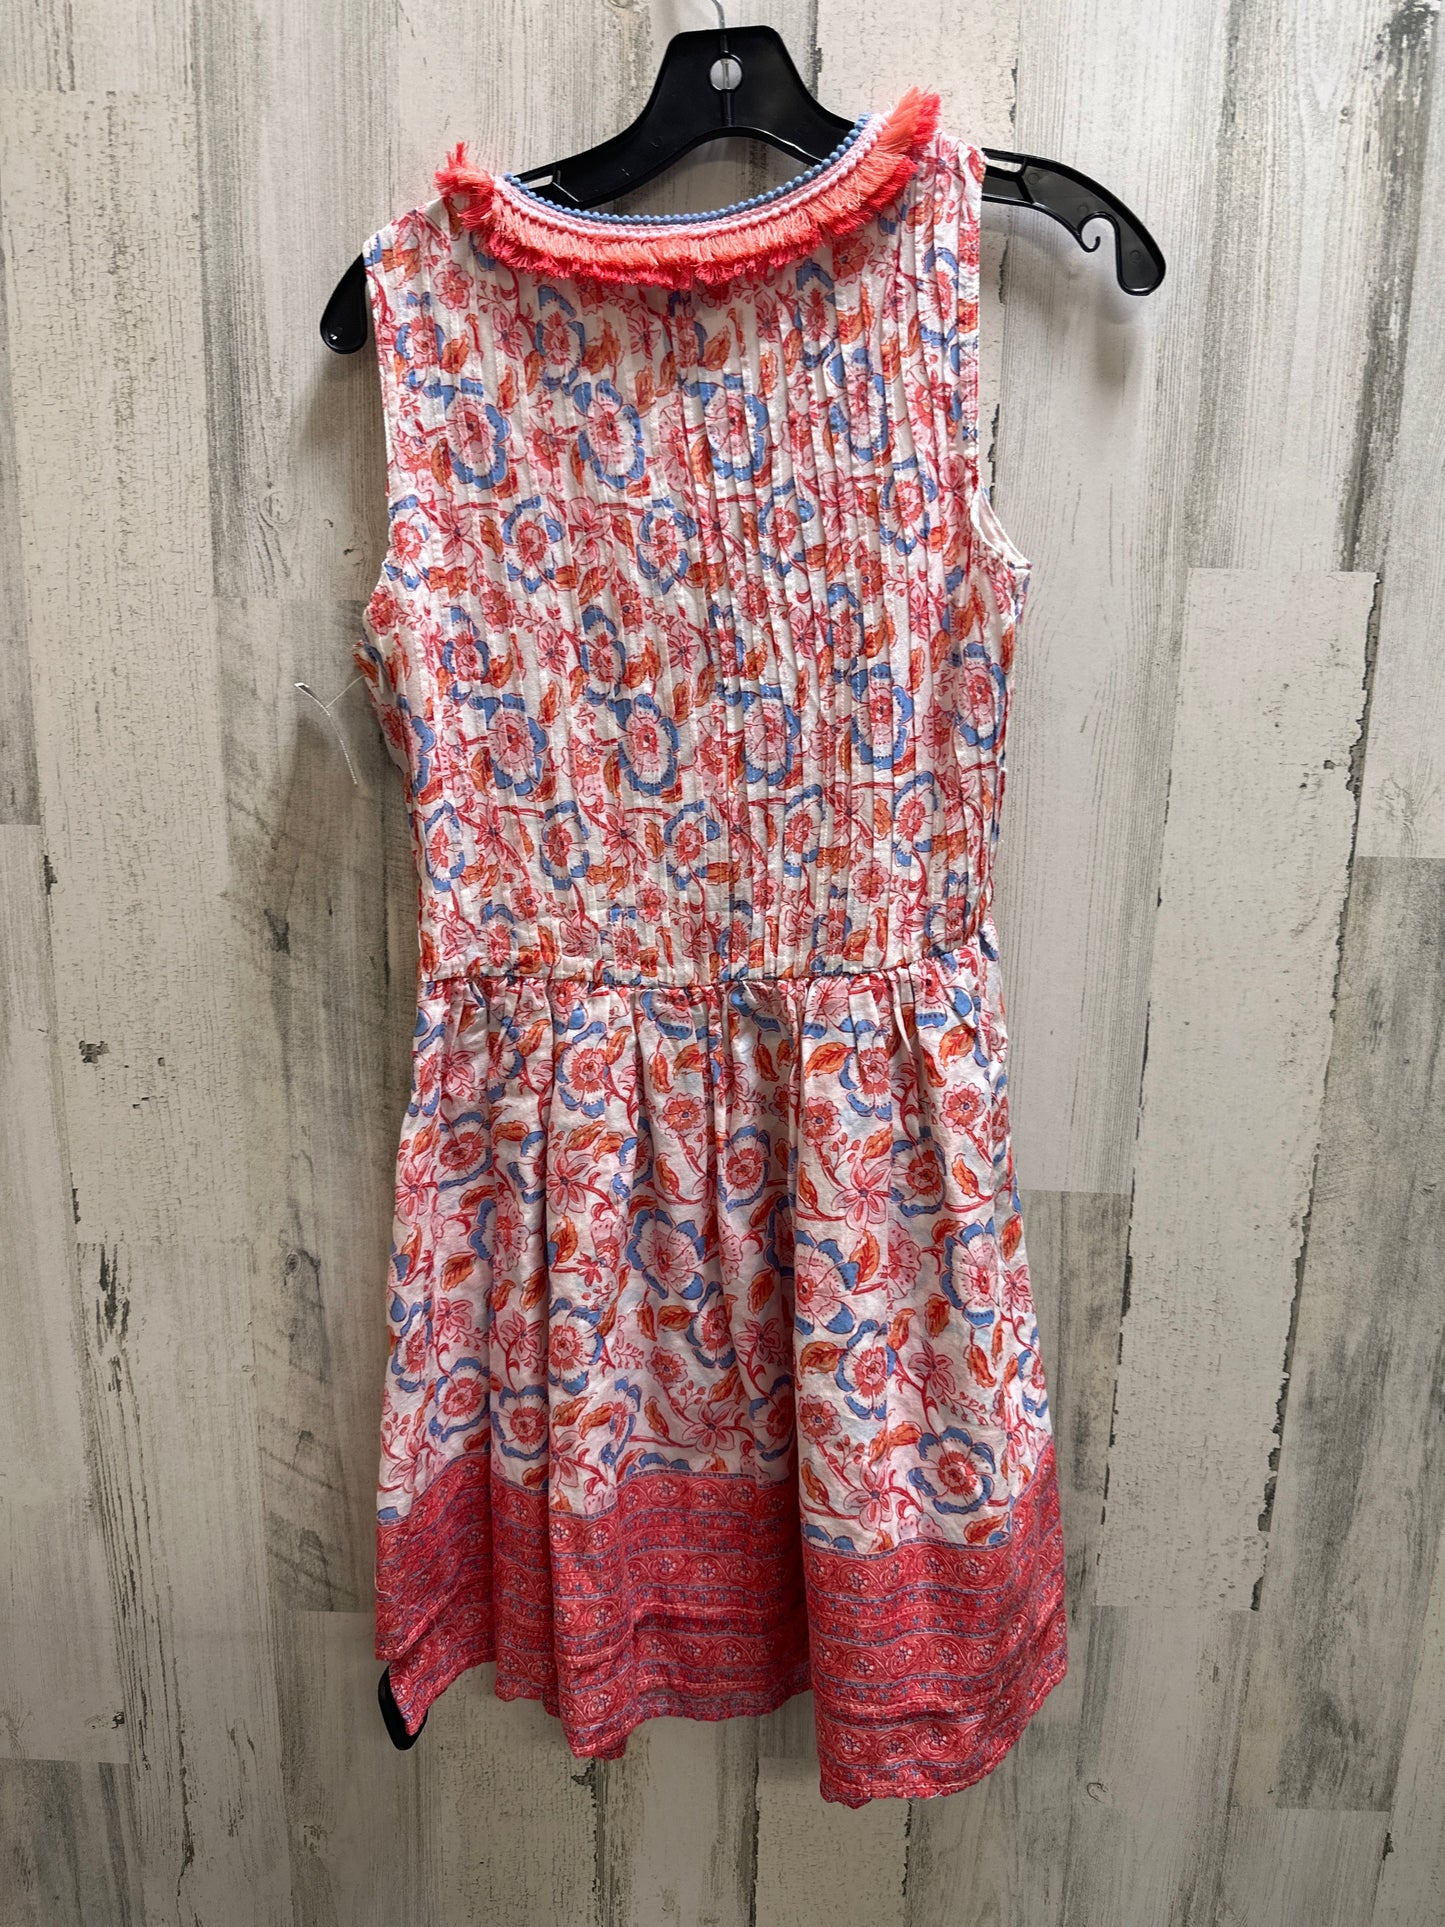 Red Dress Casual Short Vineyard Vines, Size M